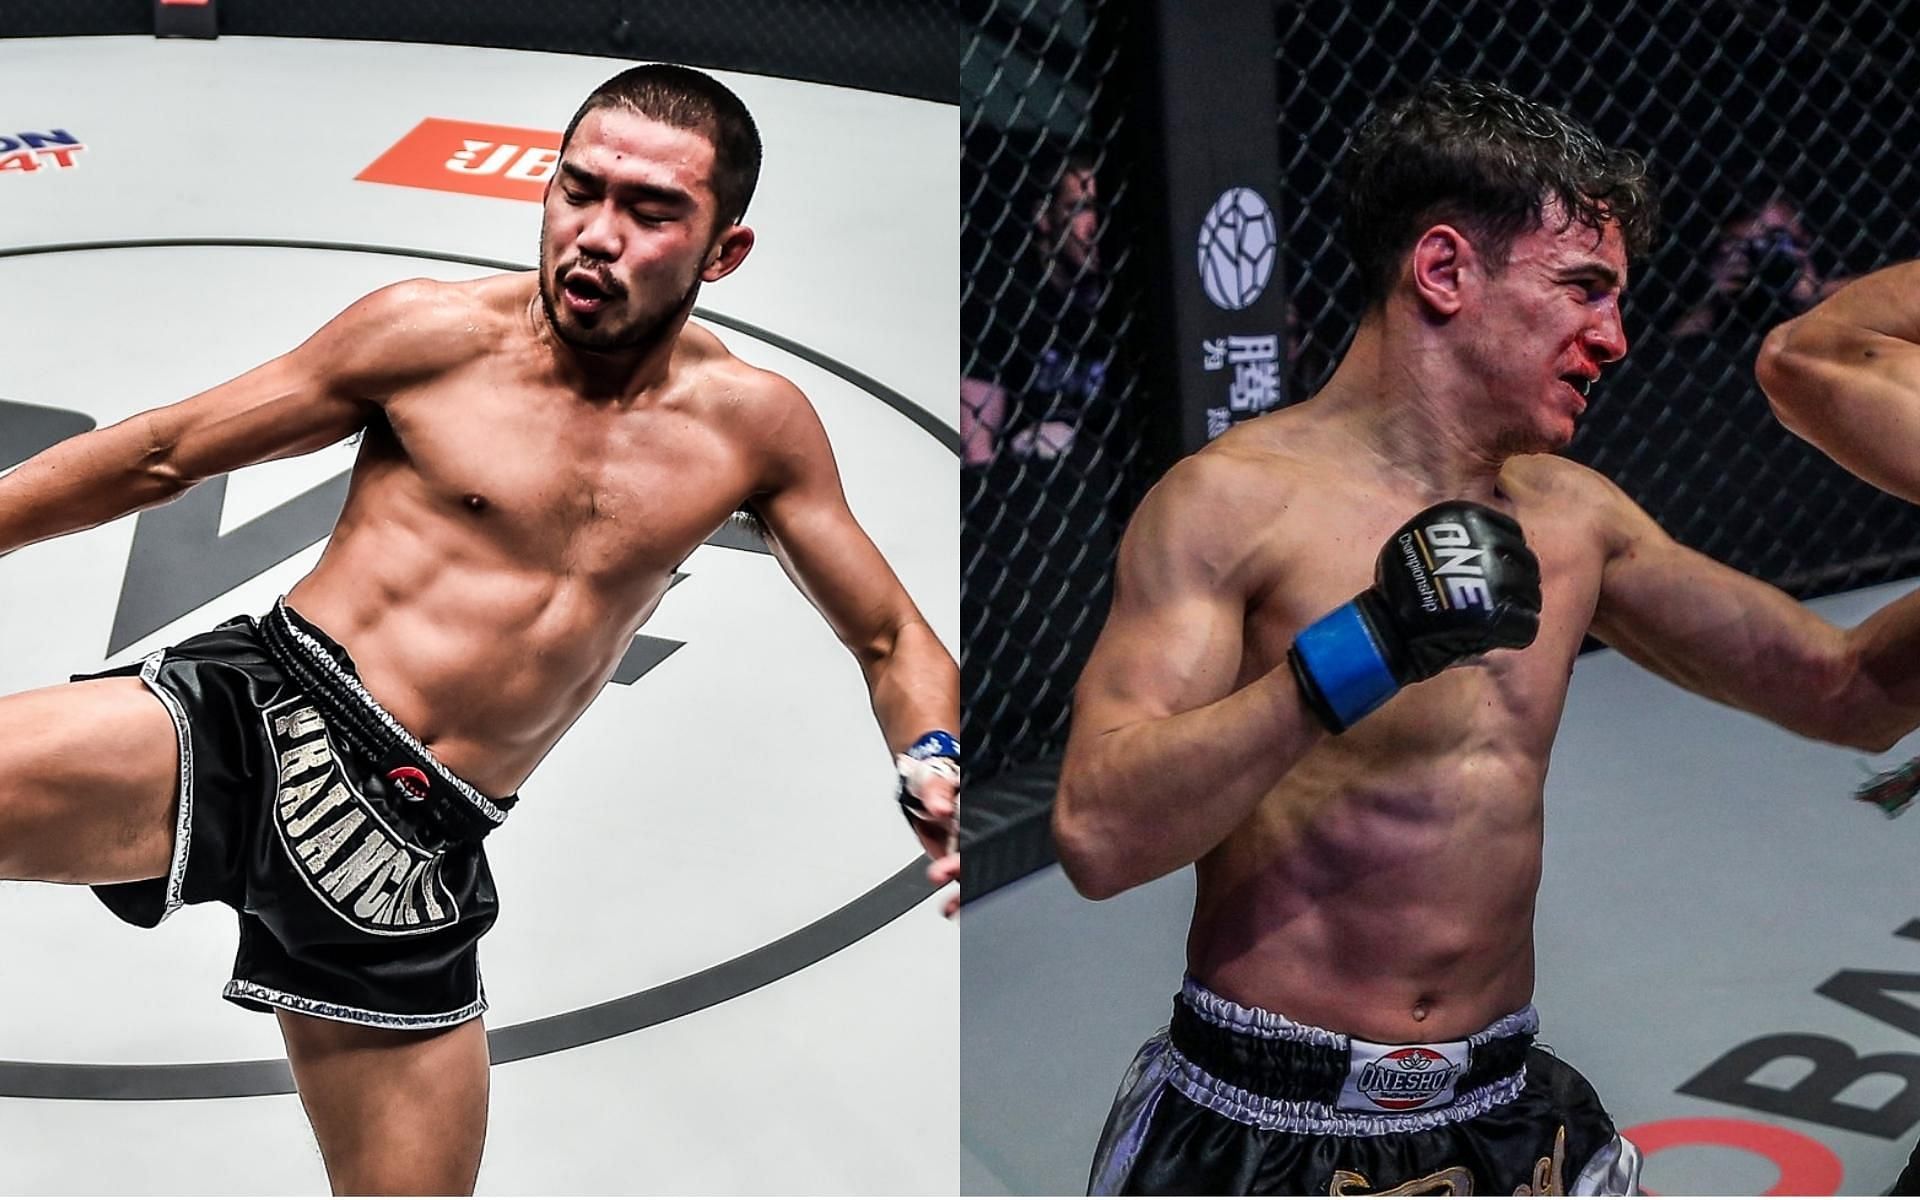 ONE strawweight Muay Thai champion Prajanchai P.K. Saenchaimuaythaigym (left) will face Joseph Lasiri (right) for the belt in the co-main event of ONE 157. (Images courtesy of ONE Championship)